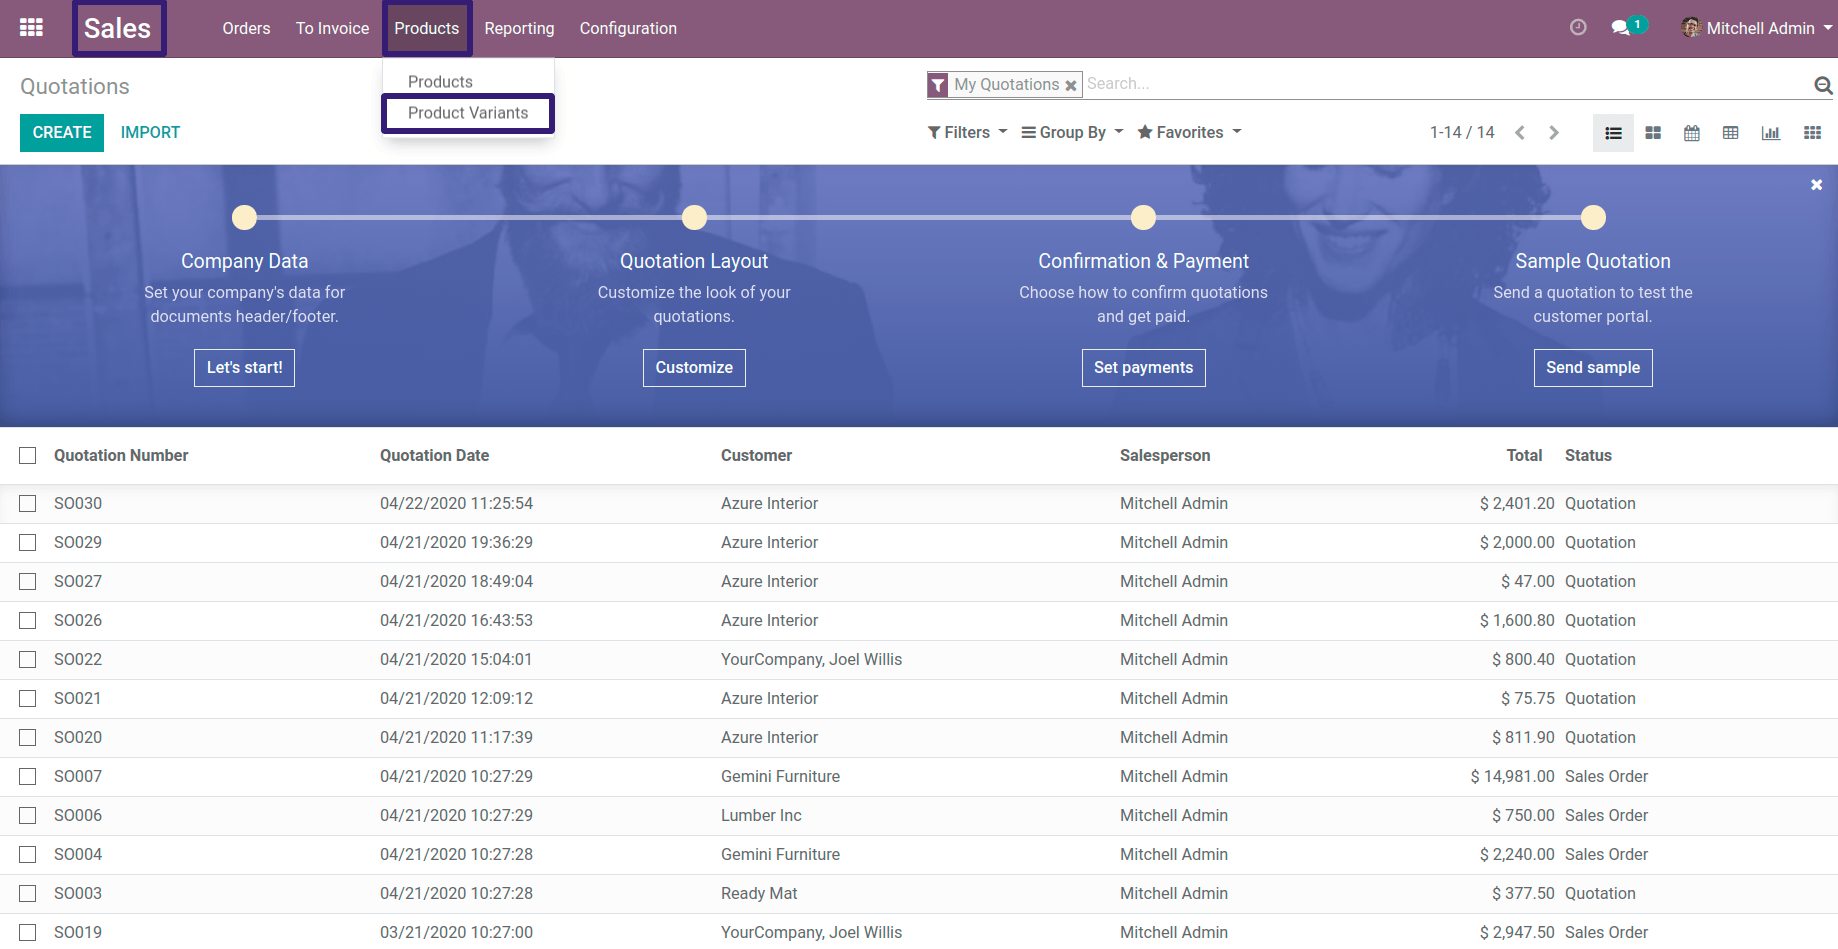 Delivery Methods In Odoo 